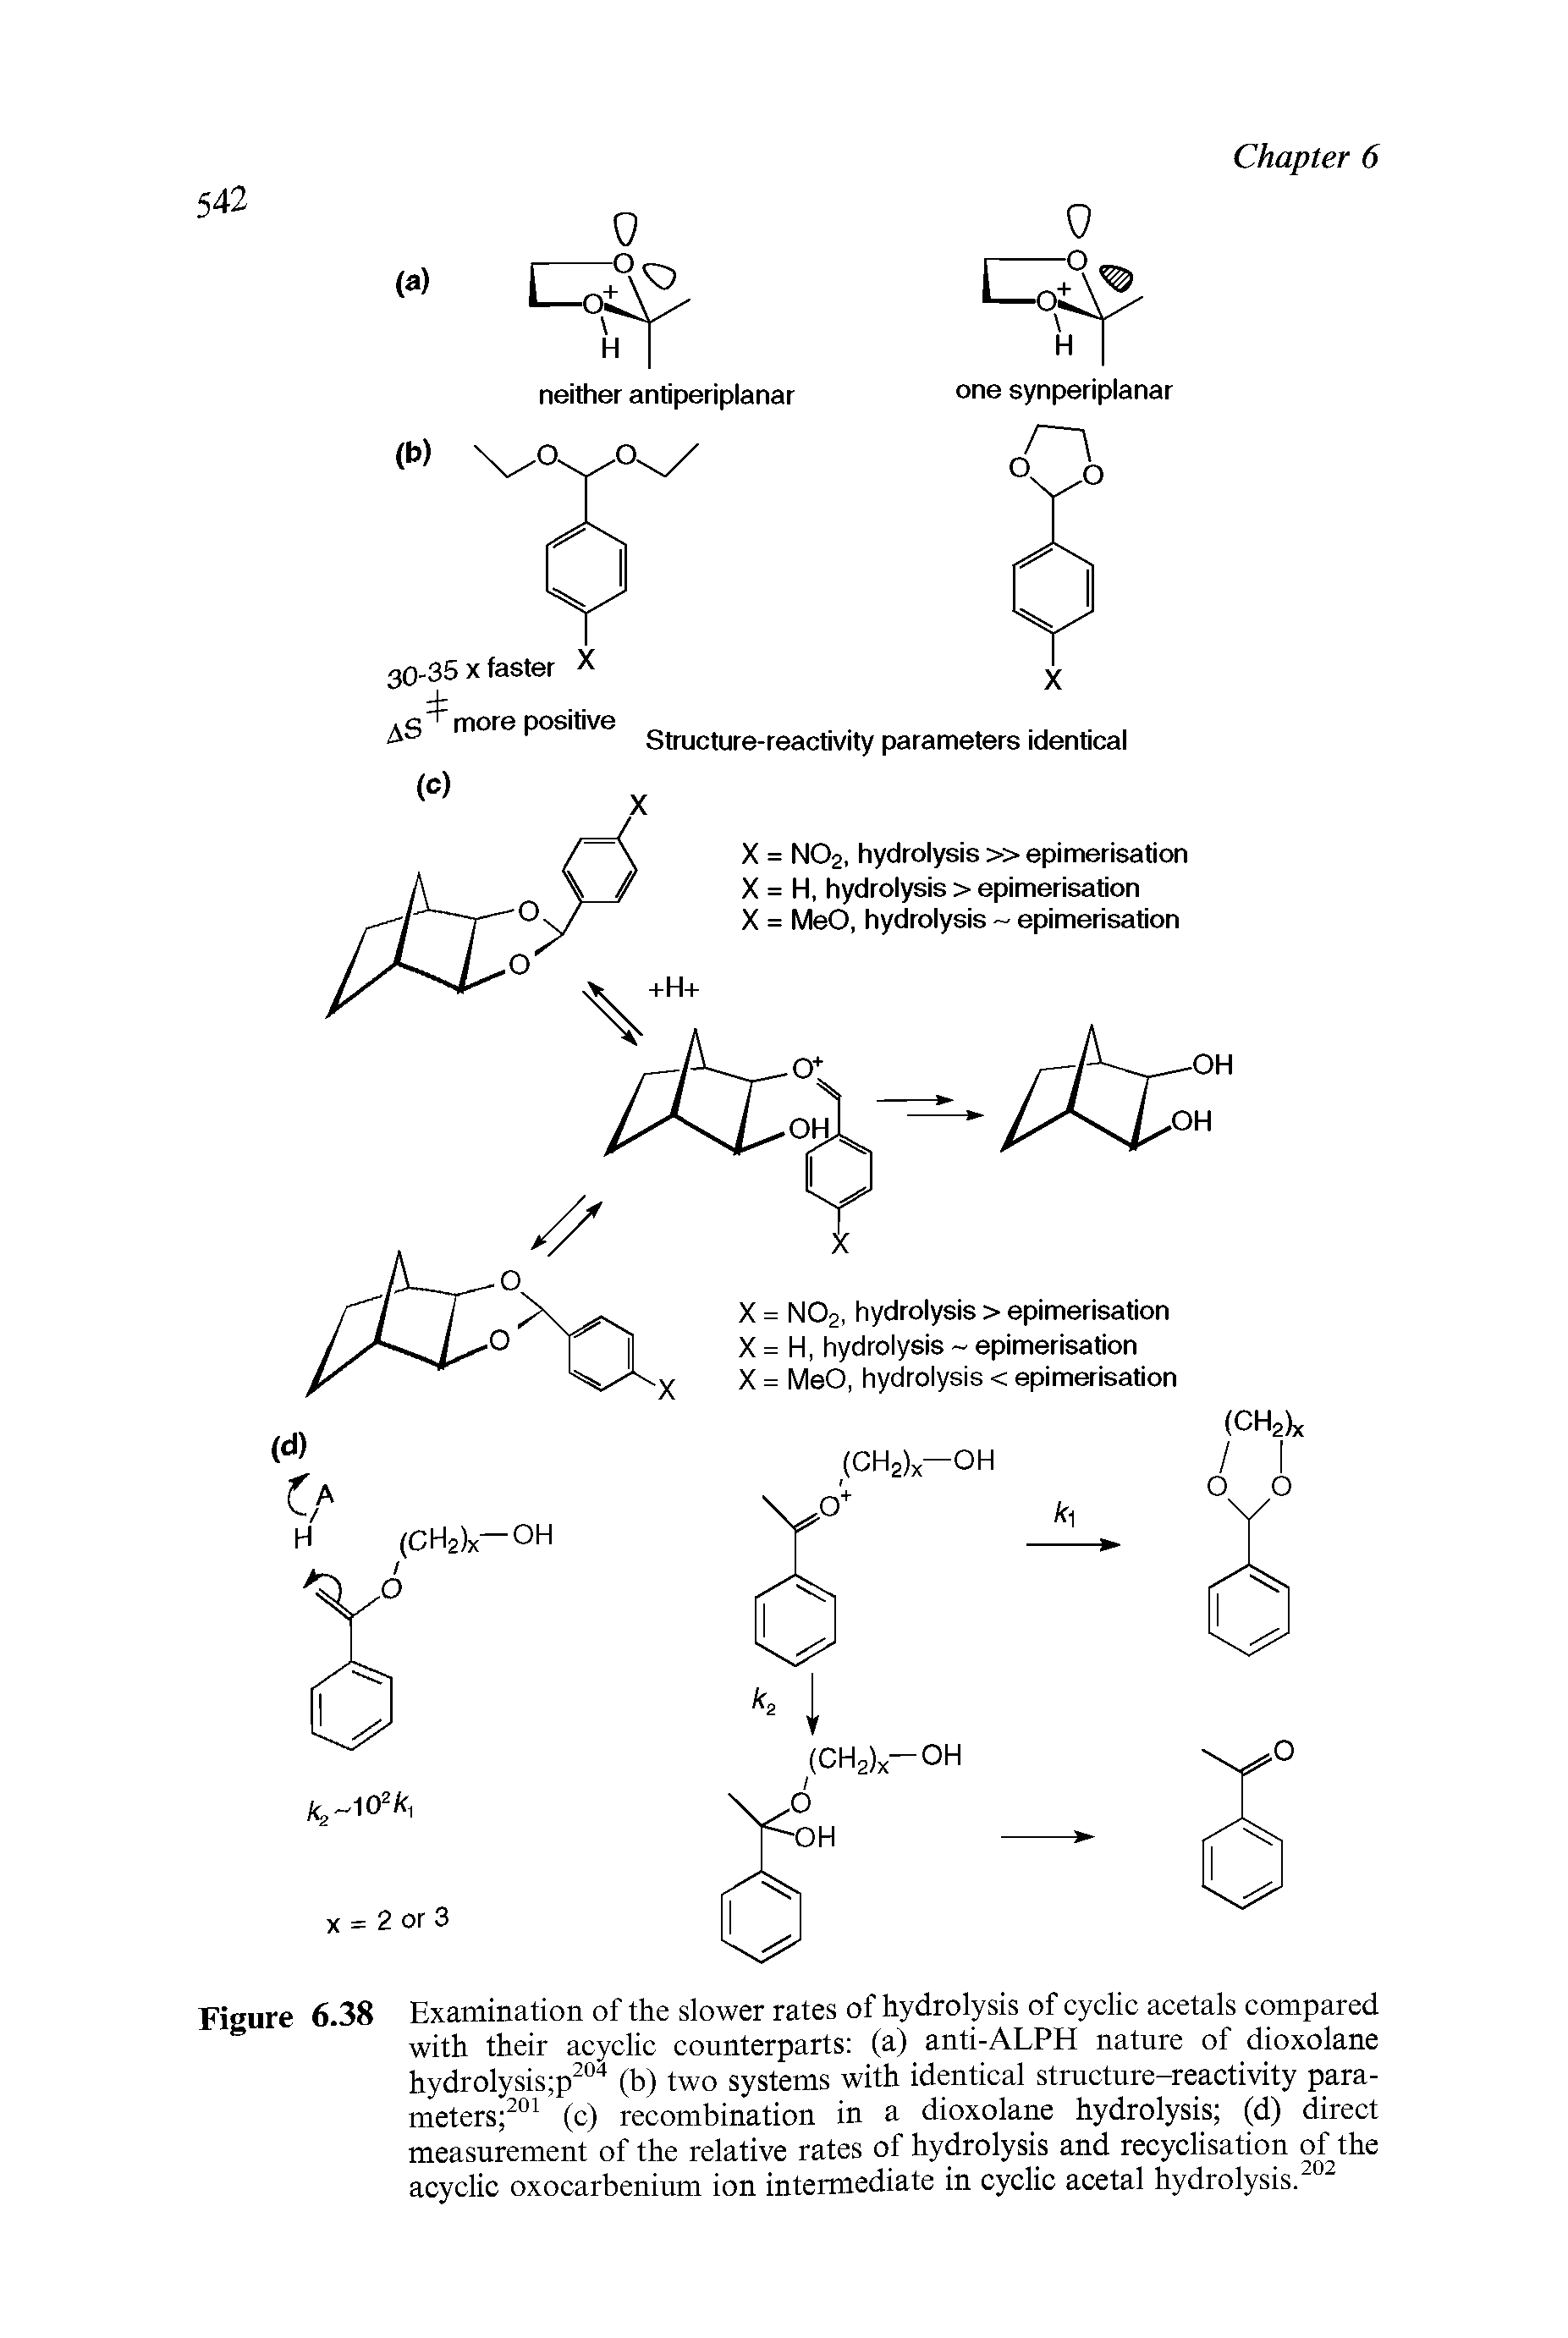 Figure 6.38 Examination of the slower rates of hydrolysis of cyclic acetals compared with their acyclic counterparts (a) anti-ALPH nature of dioxolane hydrolysis p ° (b) two systems with identical structure-reactivity para-meters ° (c) recombination in a dioxolane hydrolysis (d) direct measurement of the relative rates of hydrolysis and recyclisation of the acyclic oxocarbenium ion intermediate in cyclic acetal hydrolysis.